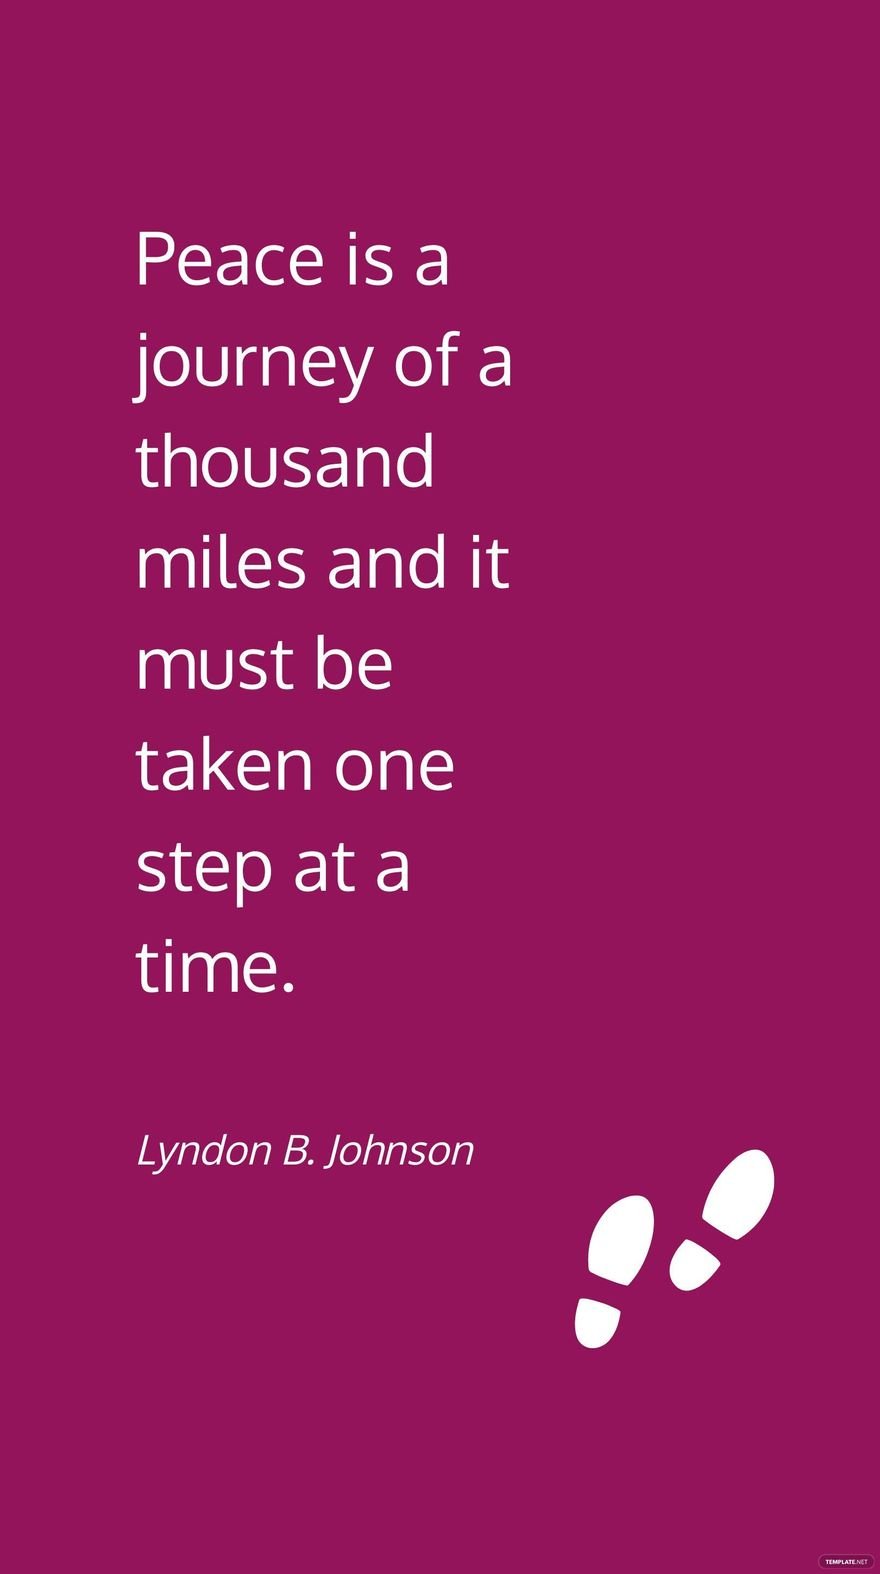 Lyndon B. Johnson - Peace is a journey of a thousand miles and it must be taken one step at a time.